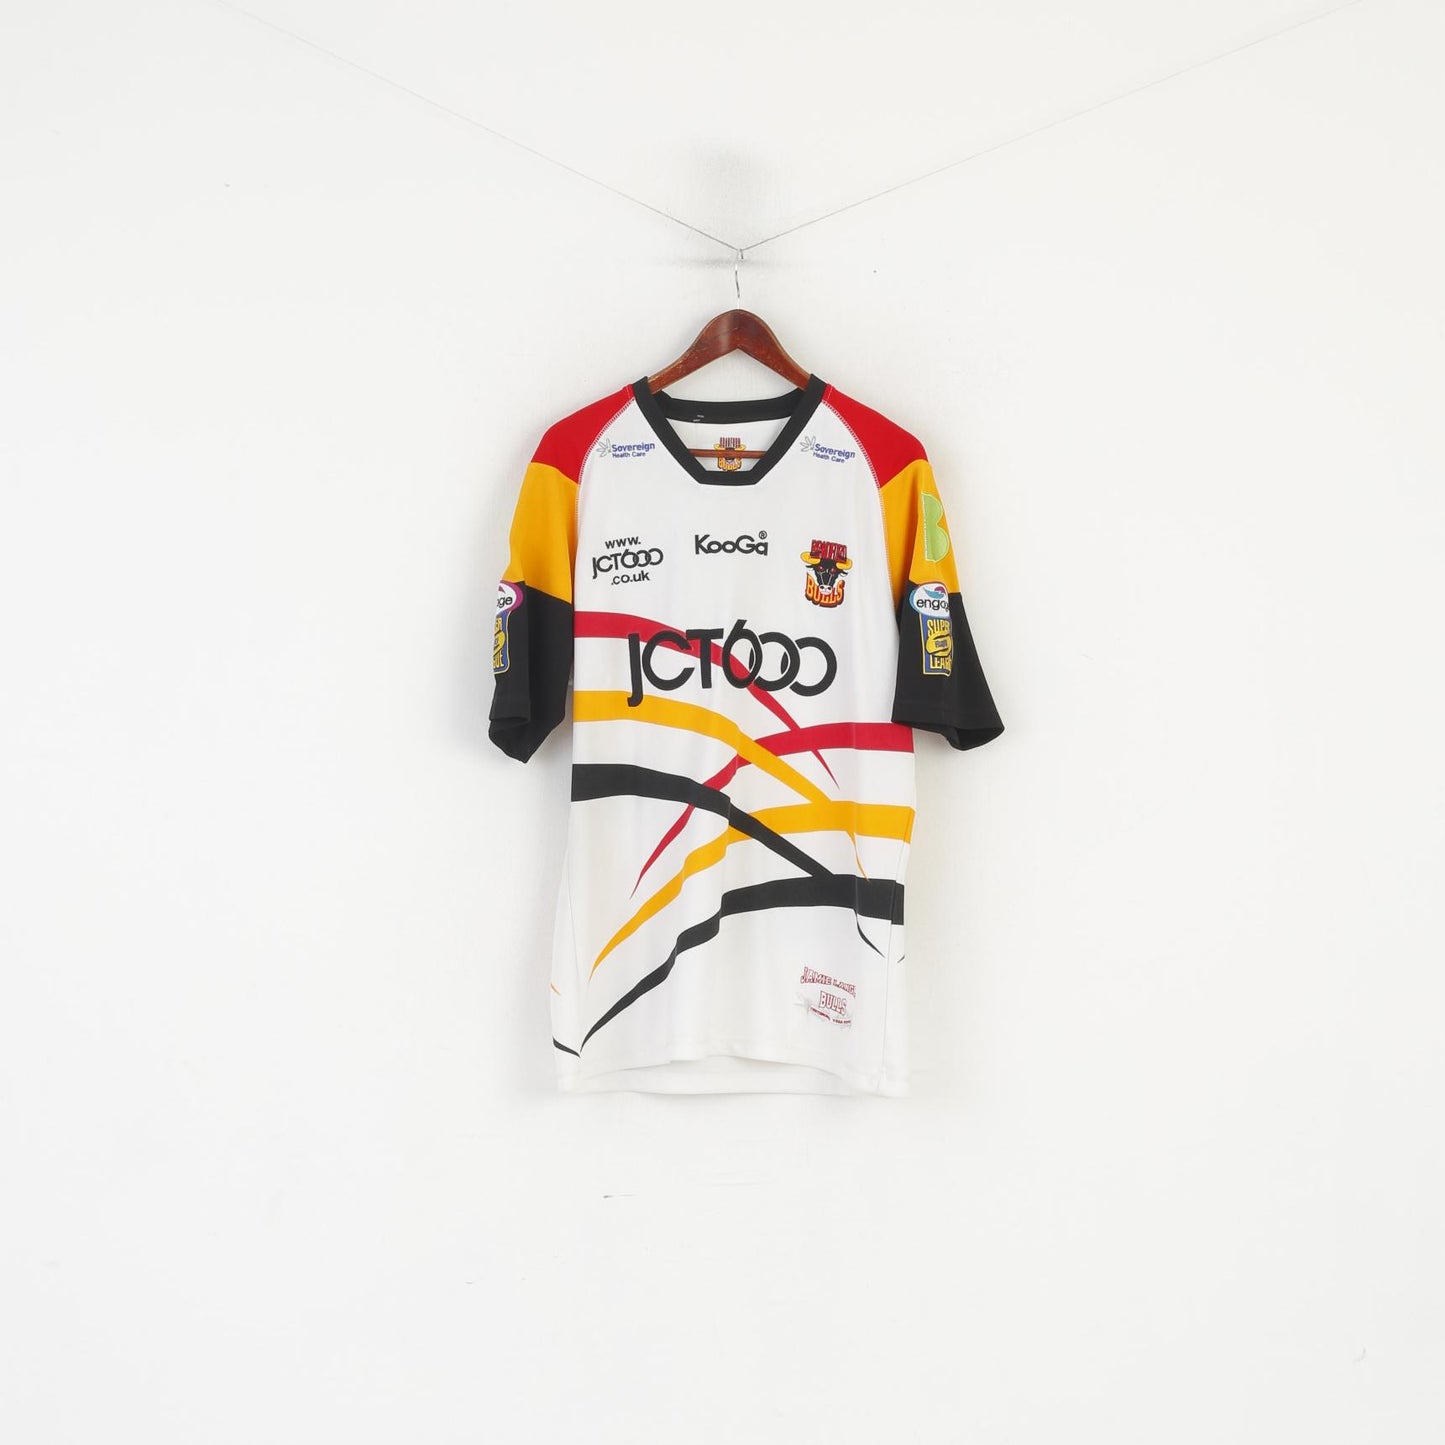 Bradford Bulls Official Men L Shirt White Rugby League Jamie Langley 2010 Jersey Top